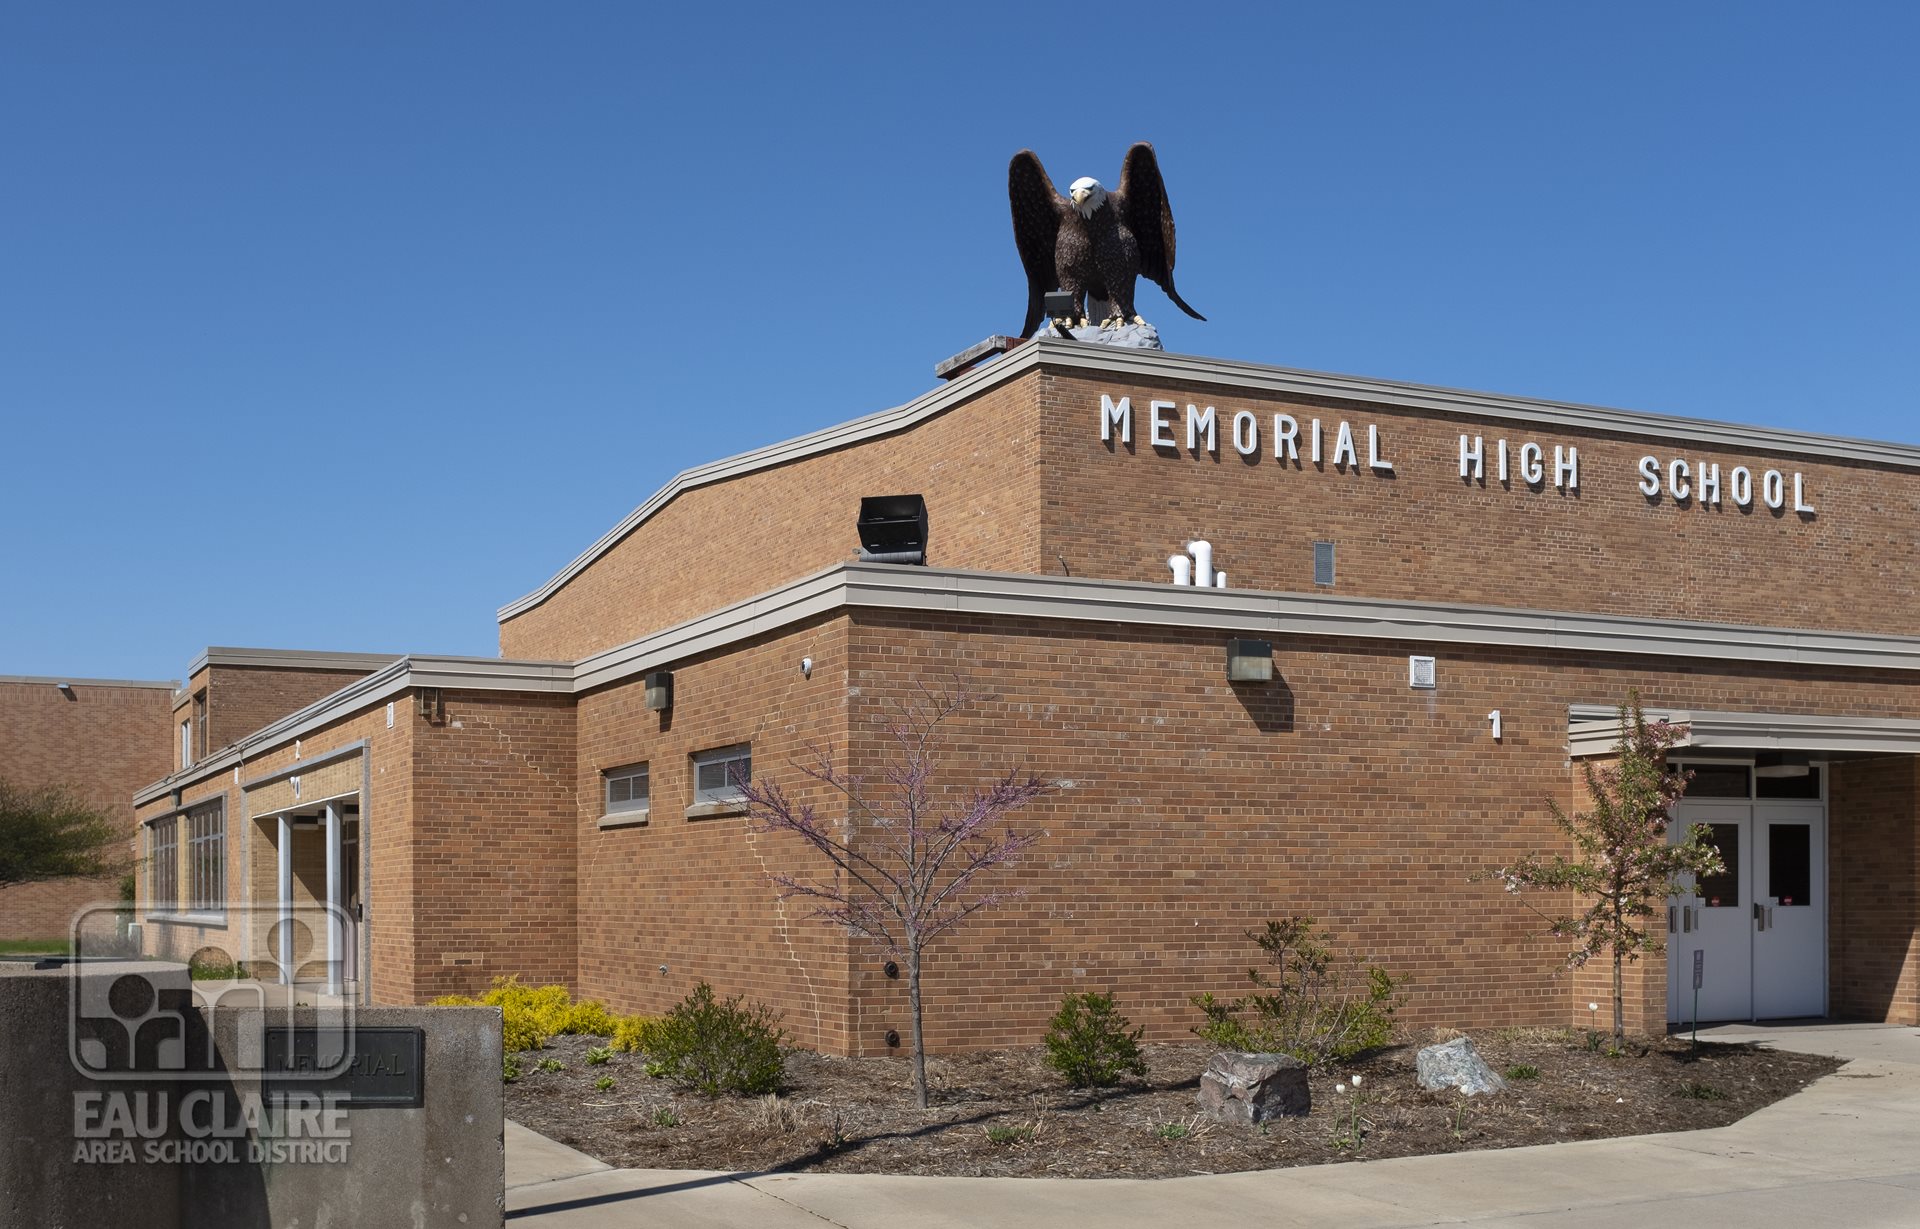 Memorial High School - Old Abe eagle on roof